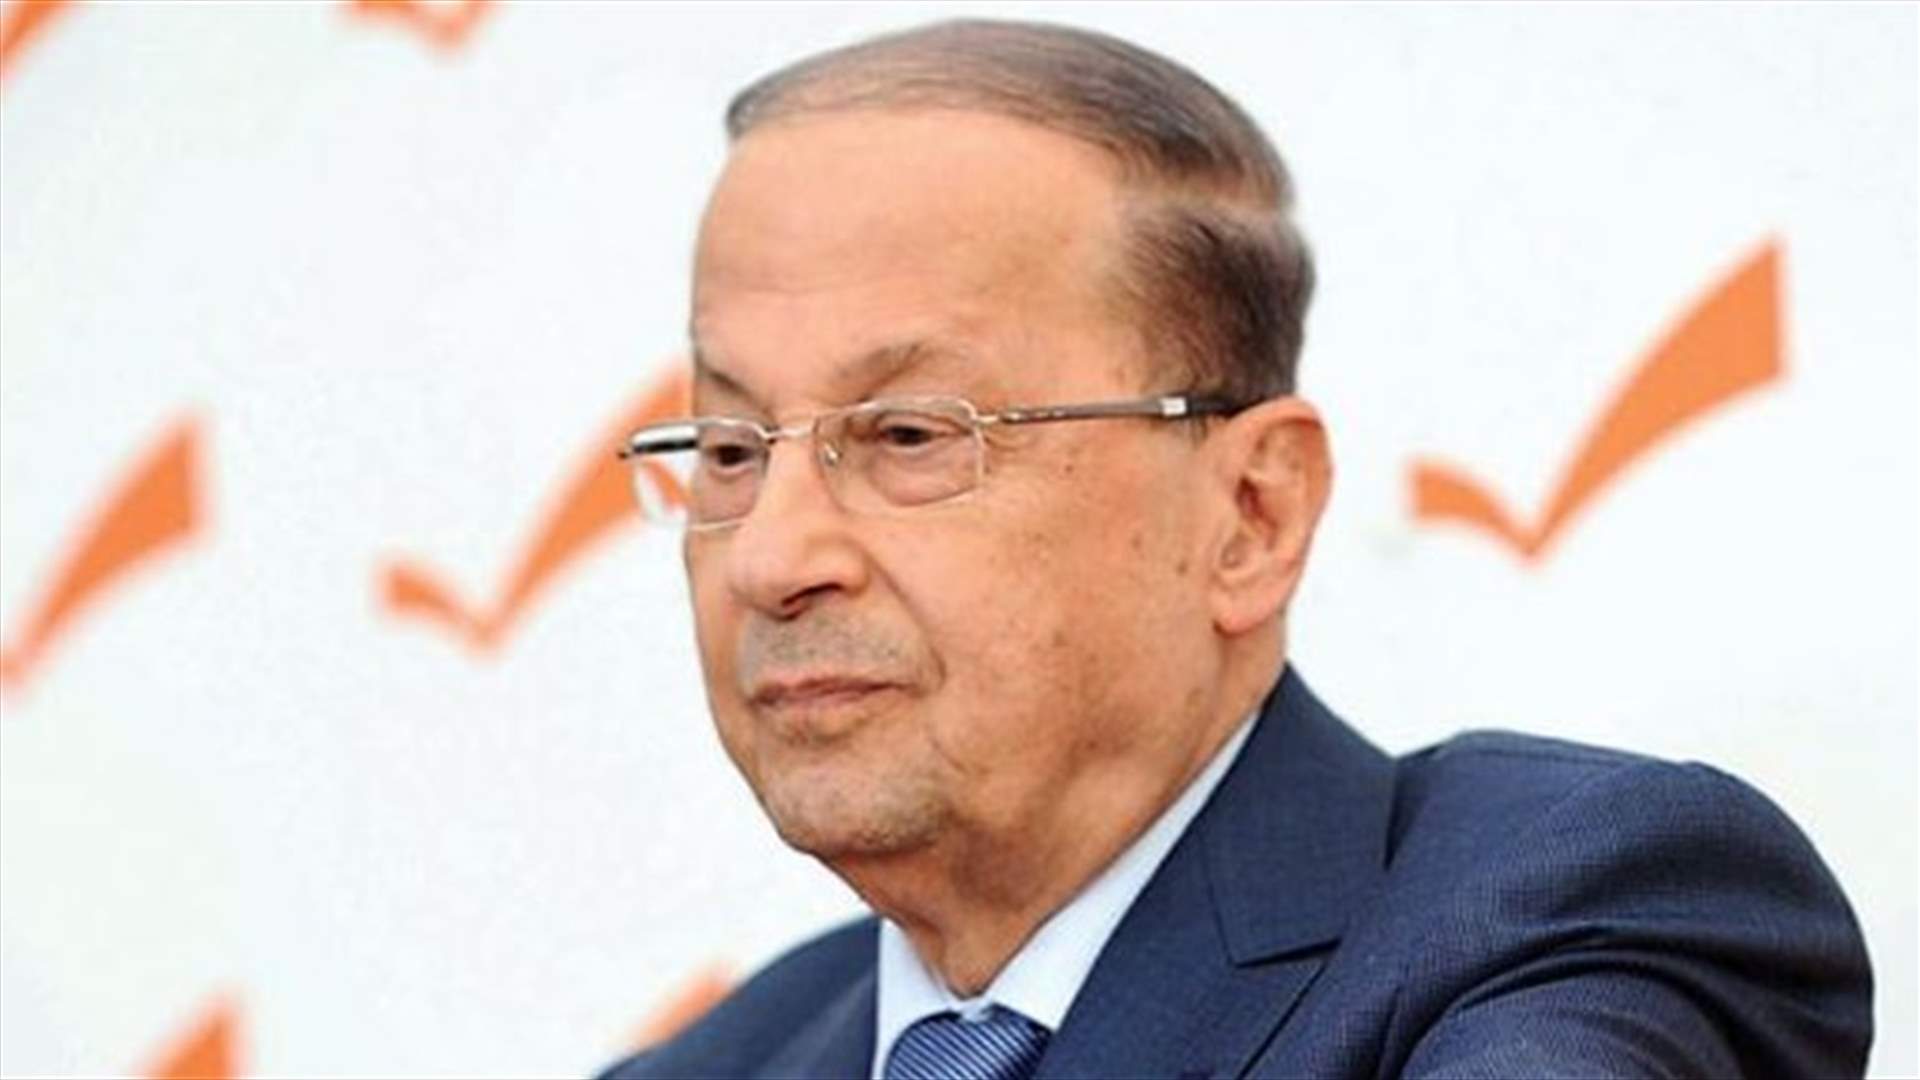 Aoun urges voters to head to polling stations regardless of their choices